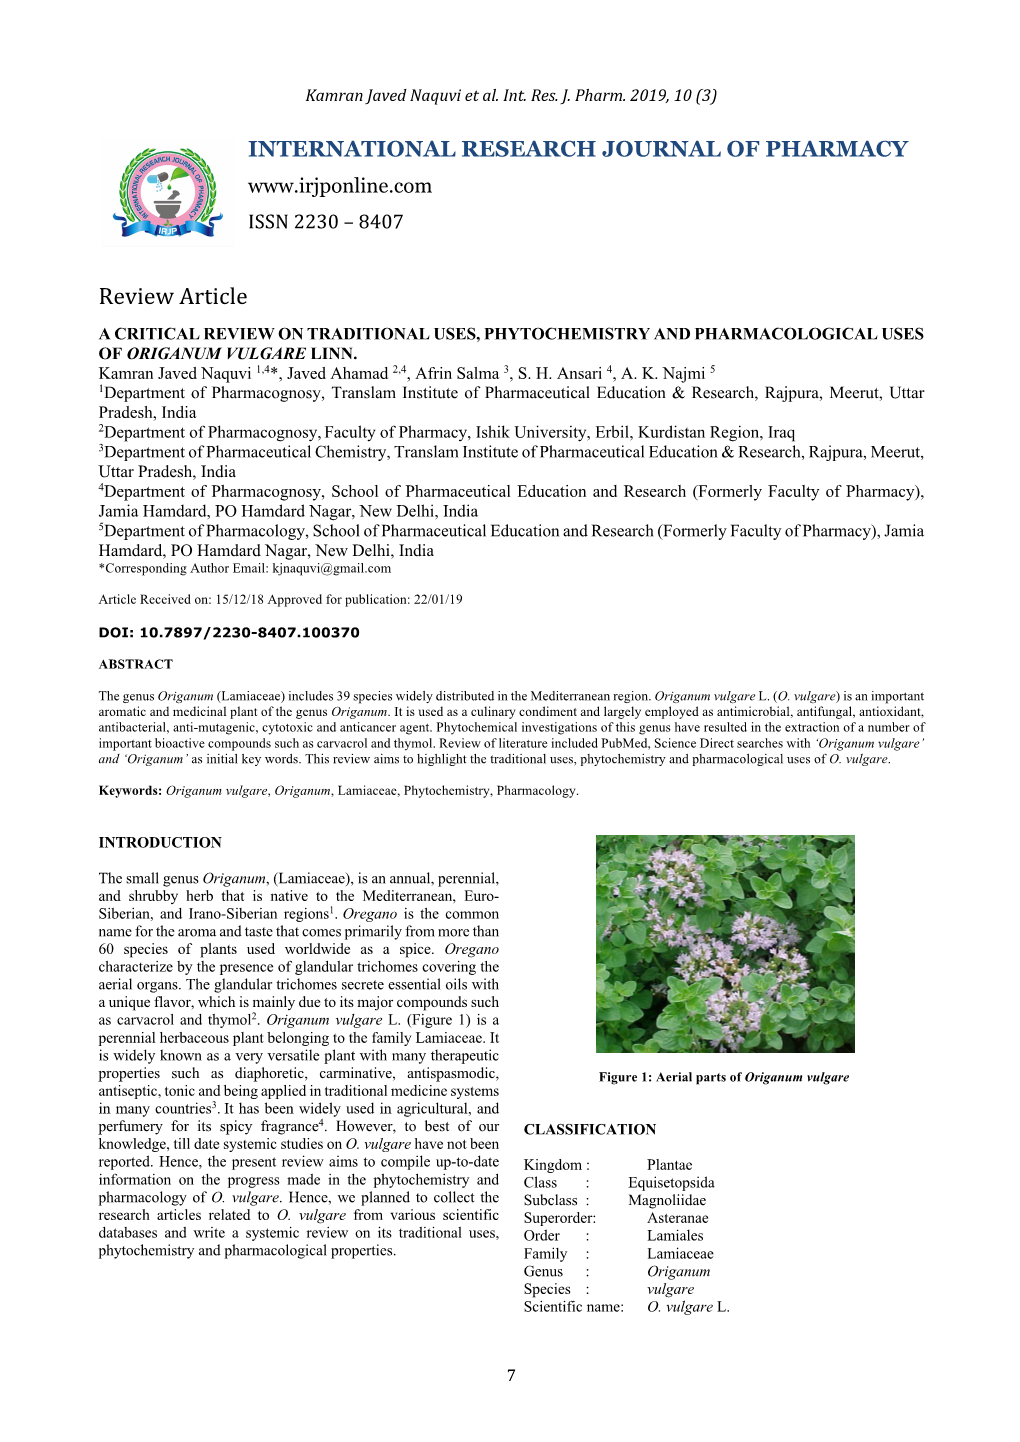 A CRITICAL REVIEW on TRADITIONAL USES, PHYTOCHEMISTRY and PHARMACOLOGICAL USES of ORIGANUM VULGARE LINN. Kamran Javed Naquvi 1,4*, Javed Ahamad 2,4, Afrin Salma 3, S